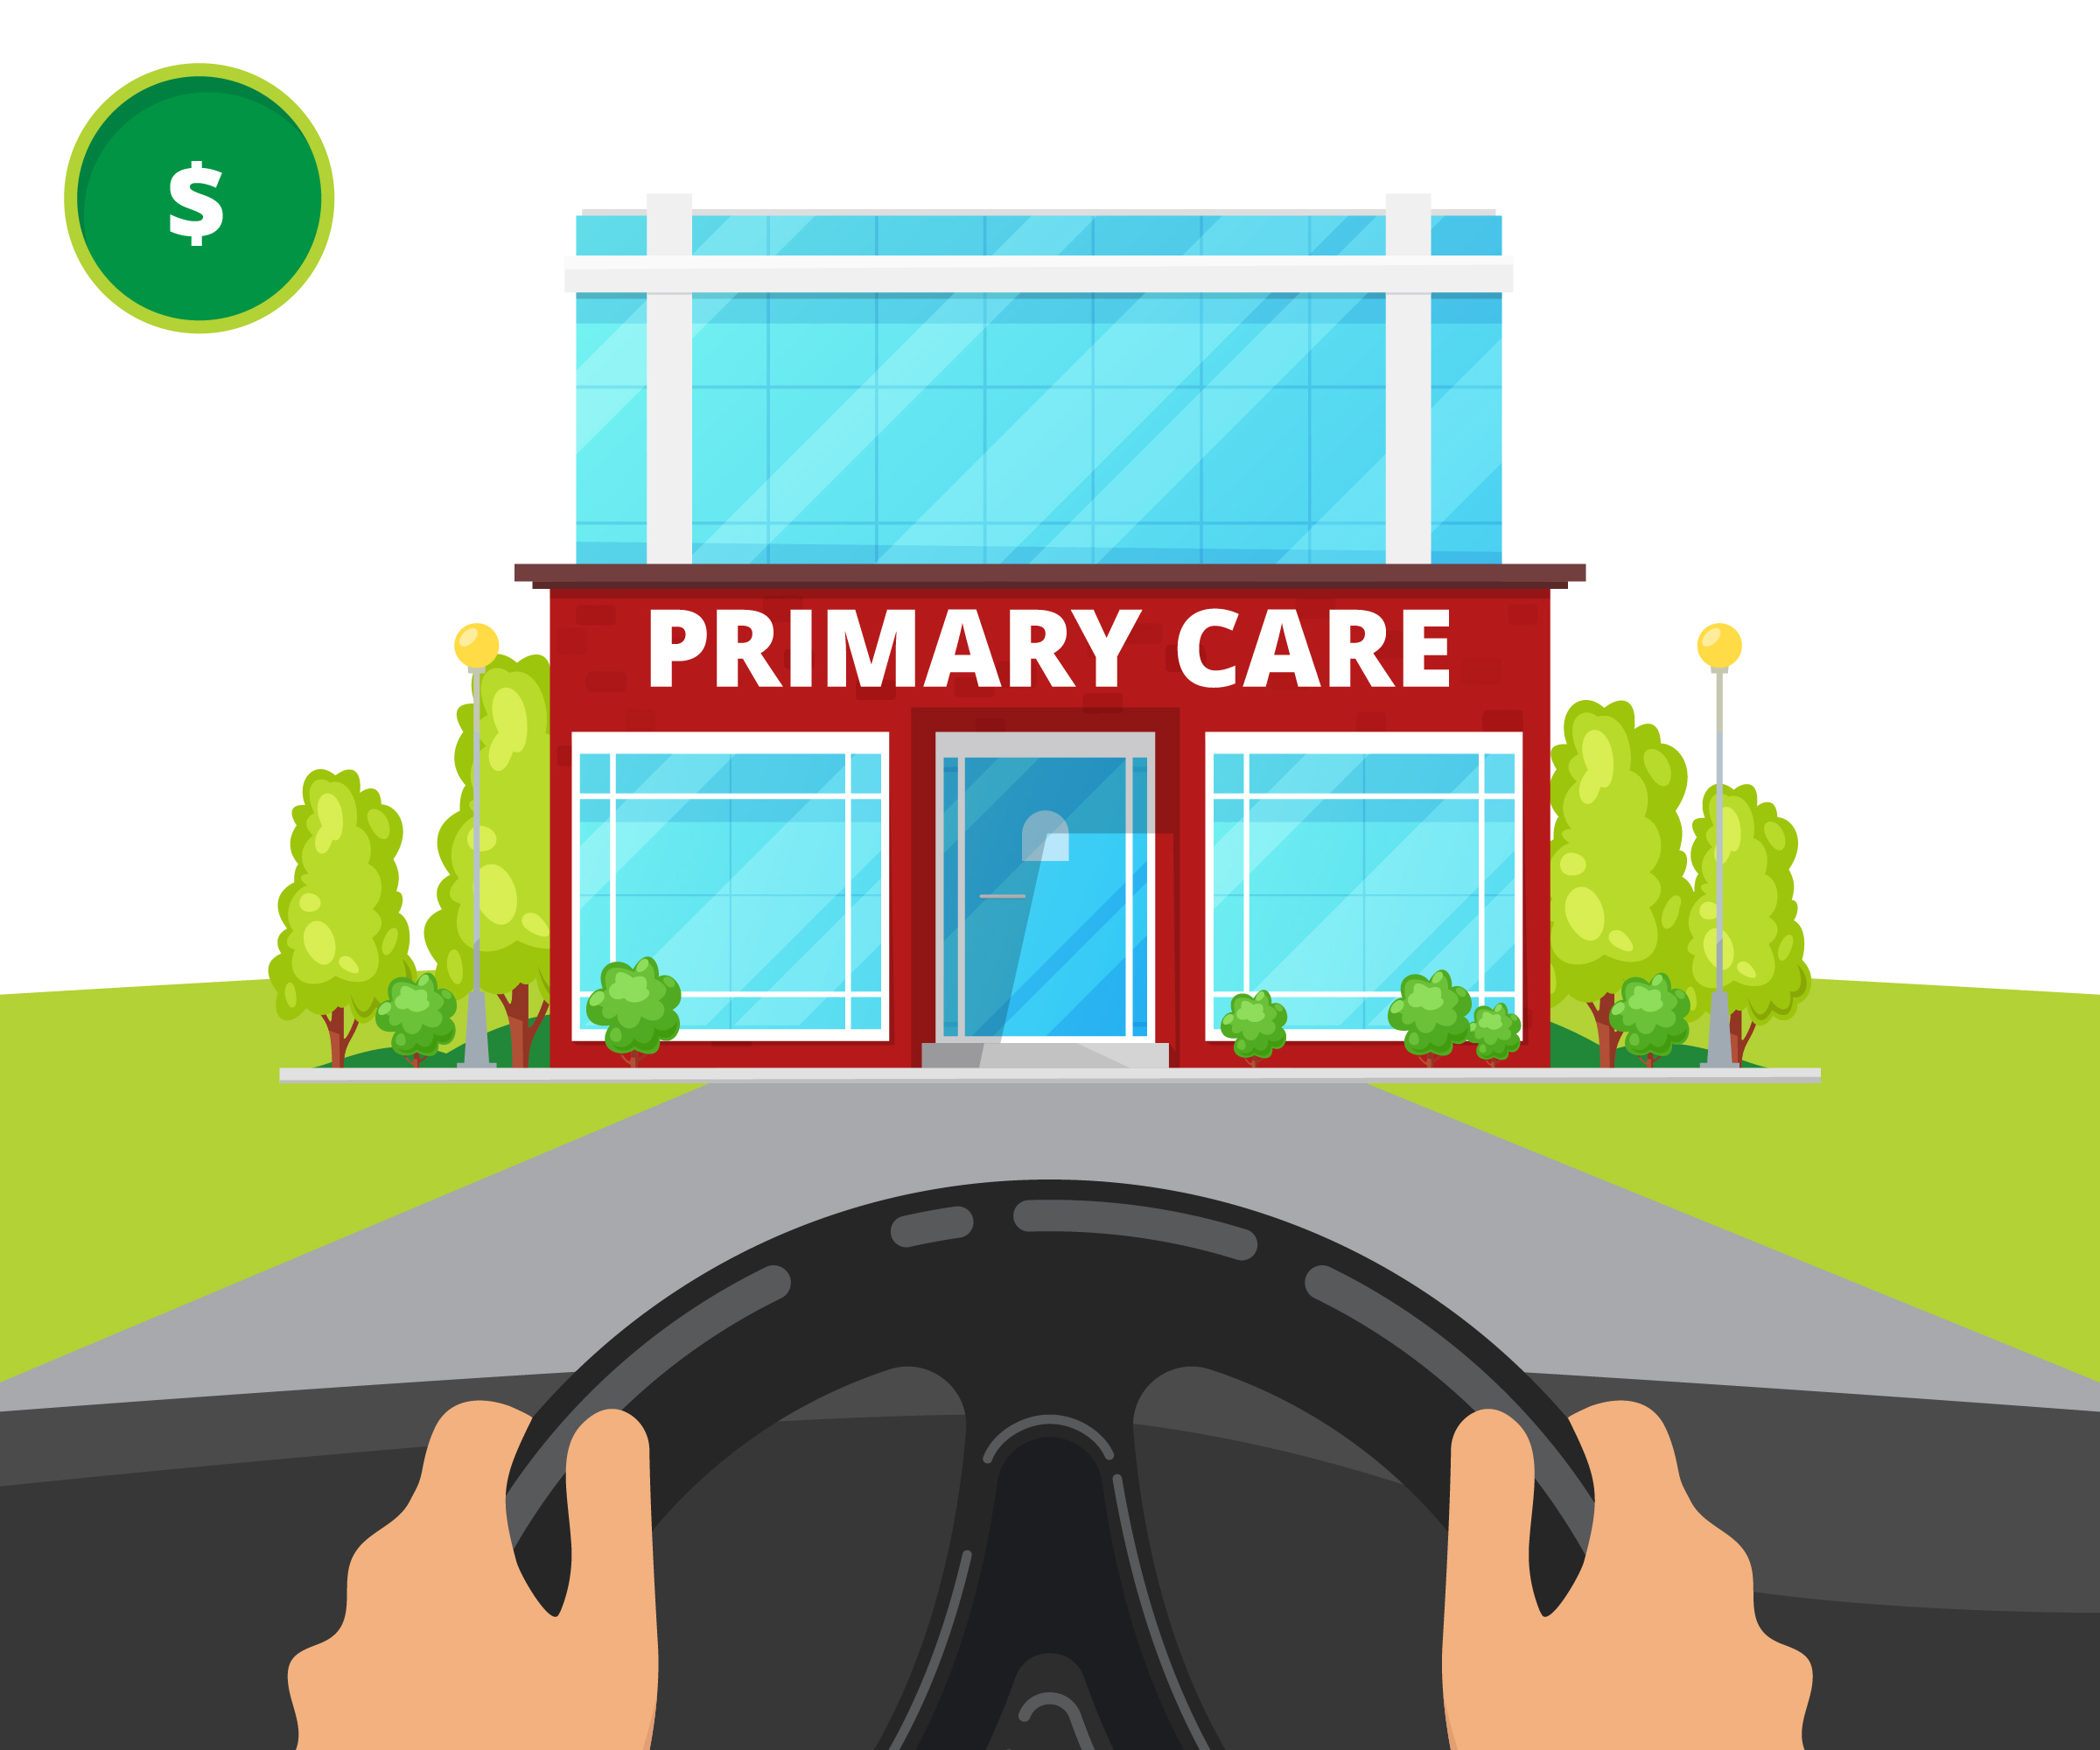 Illustration of a primary care office